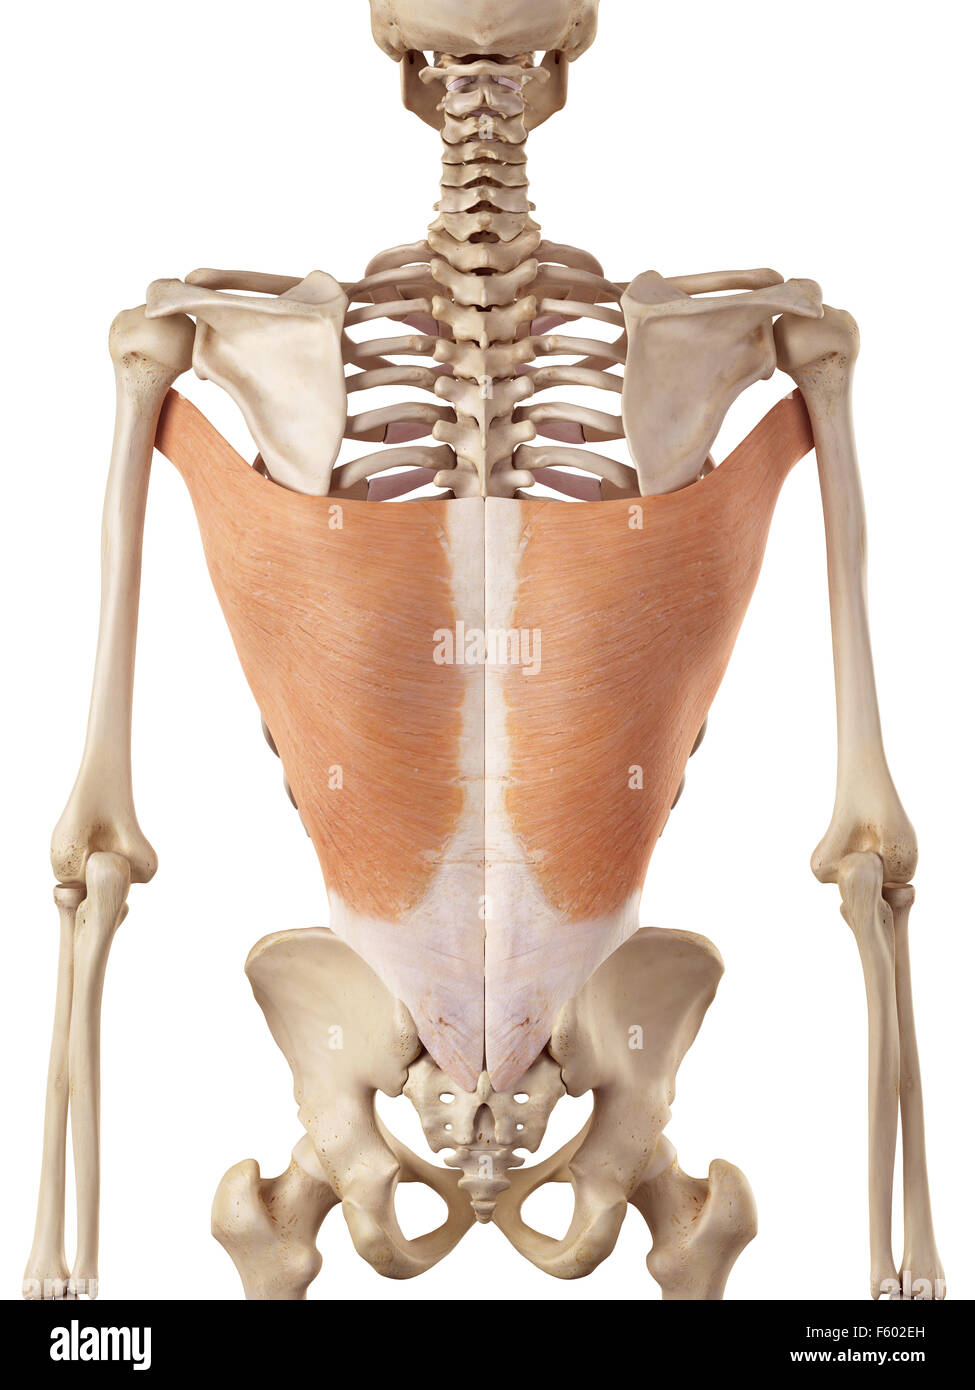 Latissimus Dorsi High Resolution Stock Photography and Images - Alamy